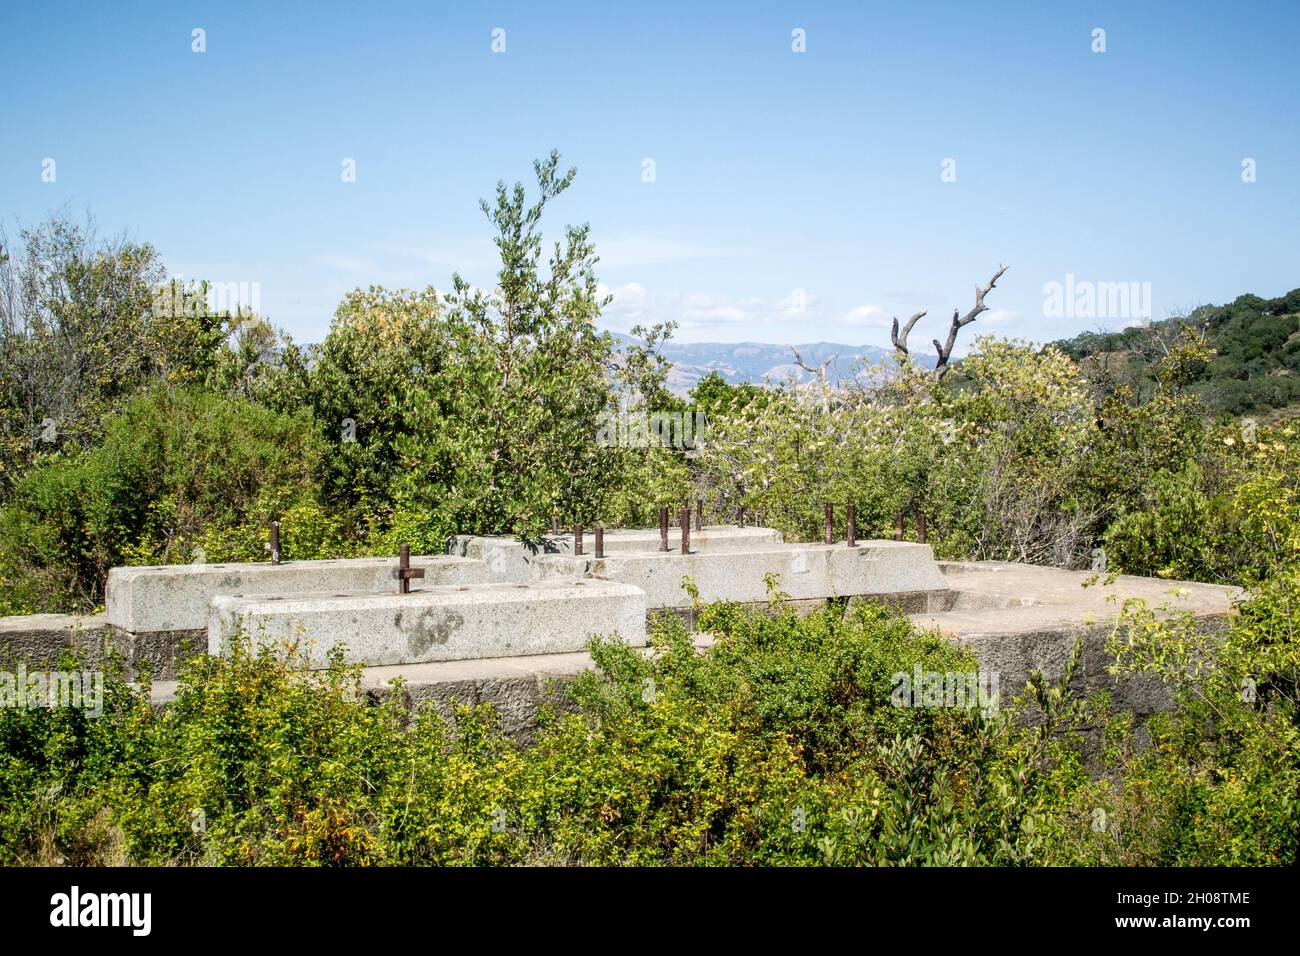 Remains of the abandoned (in 1893) Buena Vista Shaft in New Almaden Hills. Granite footings remain where the once impressive pump house stood. Stock Photo